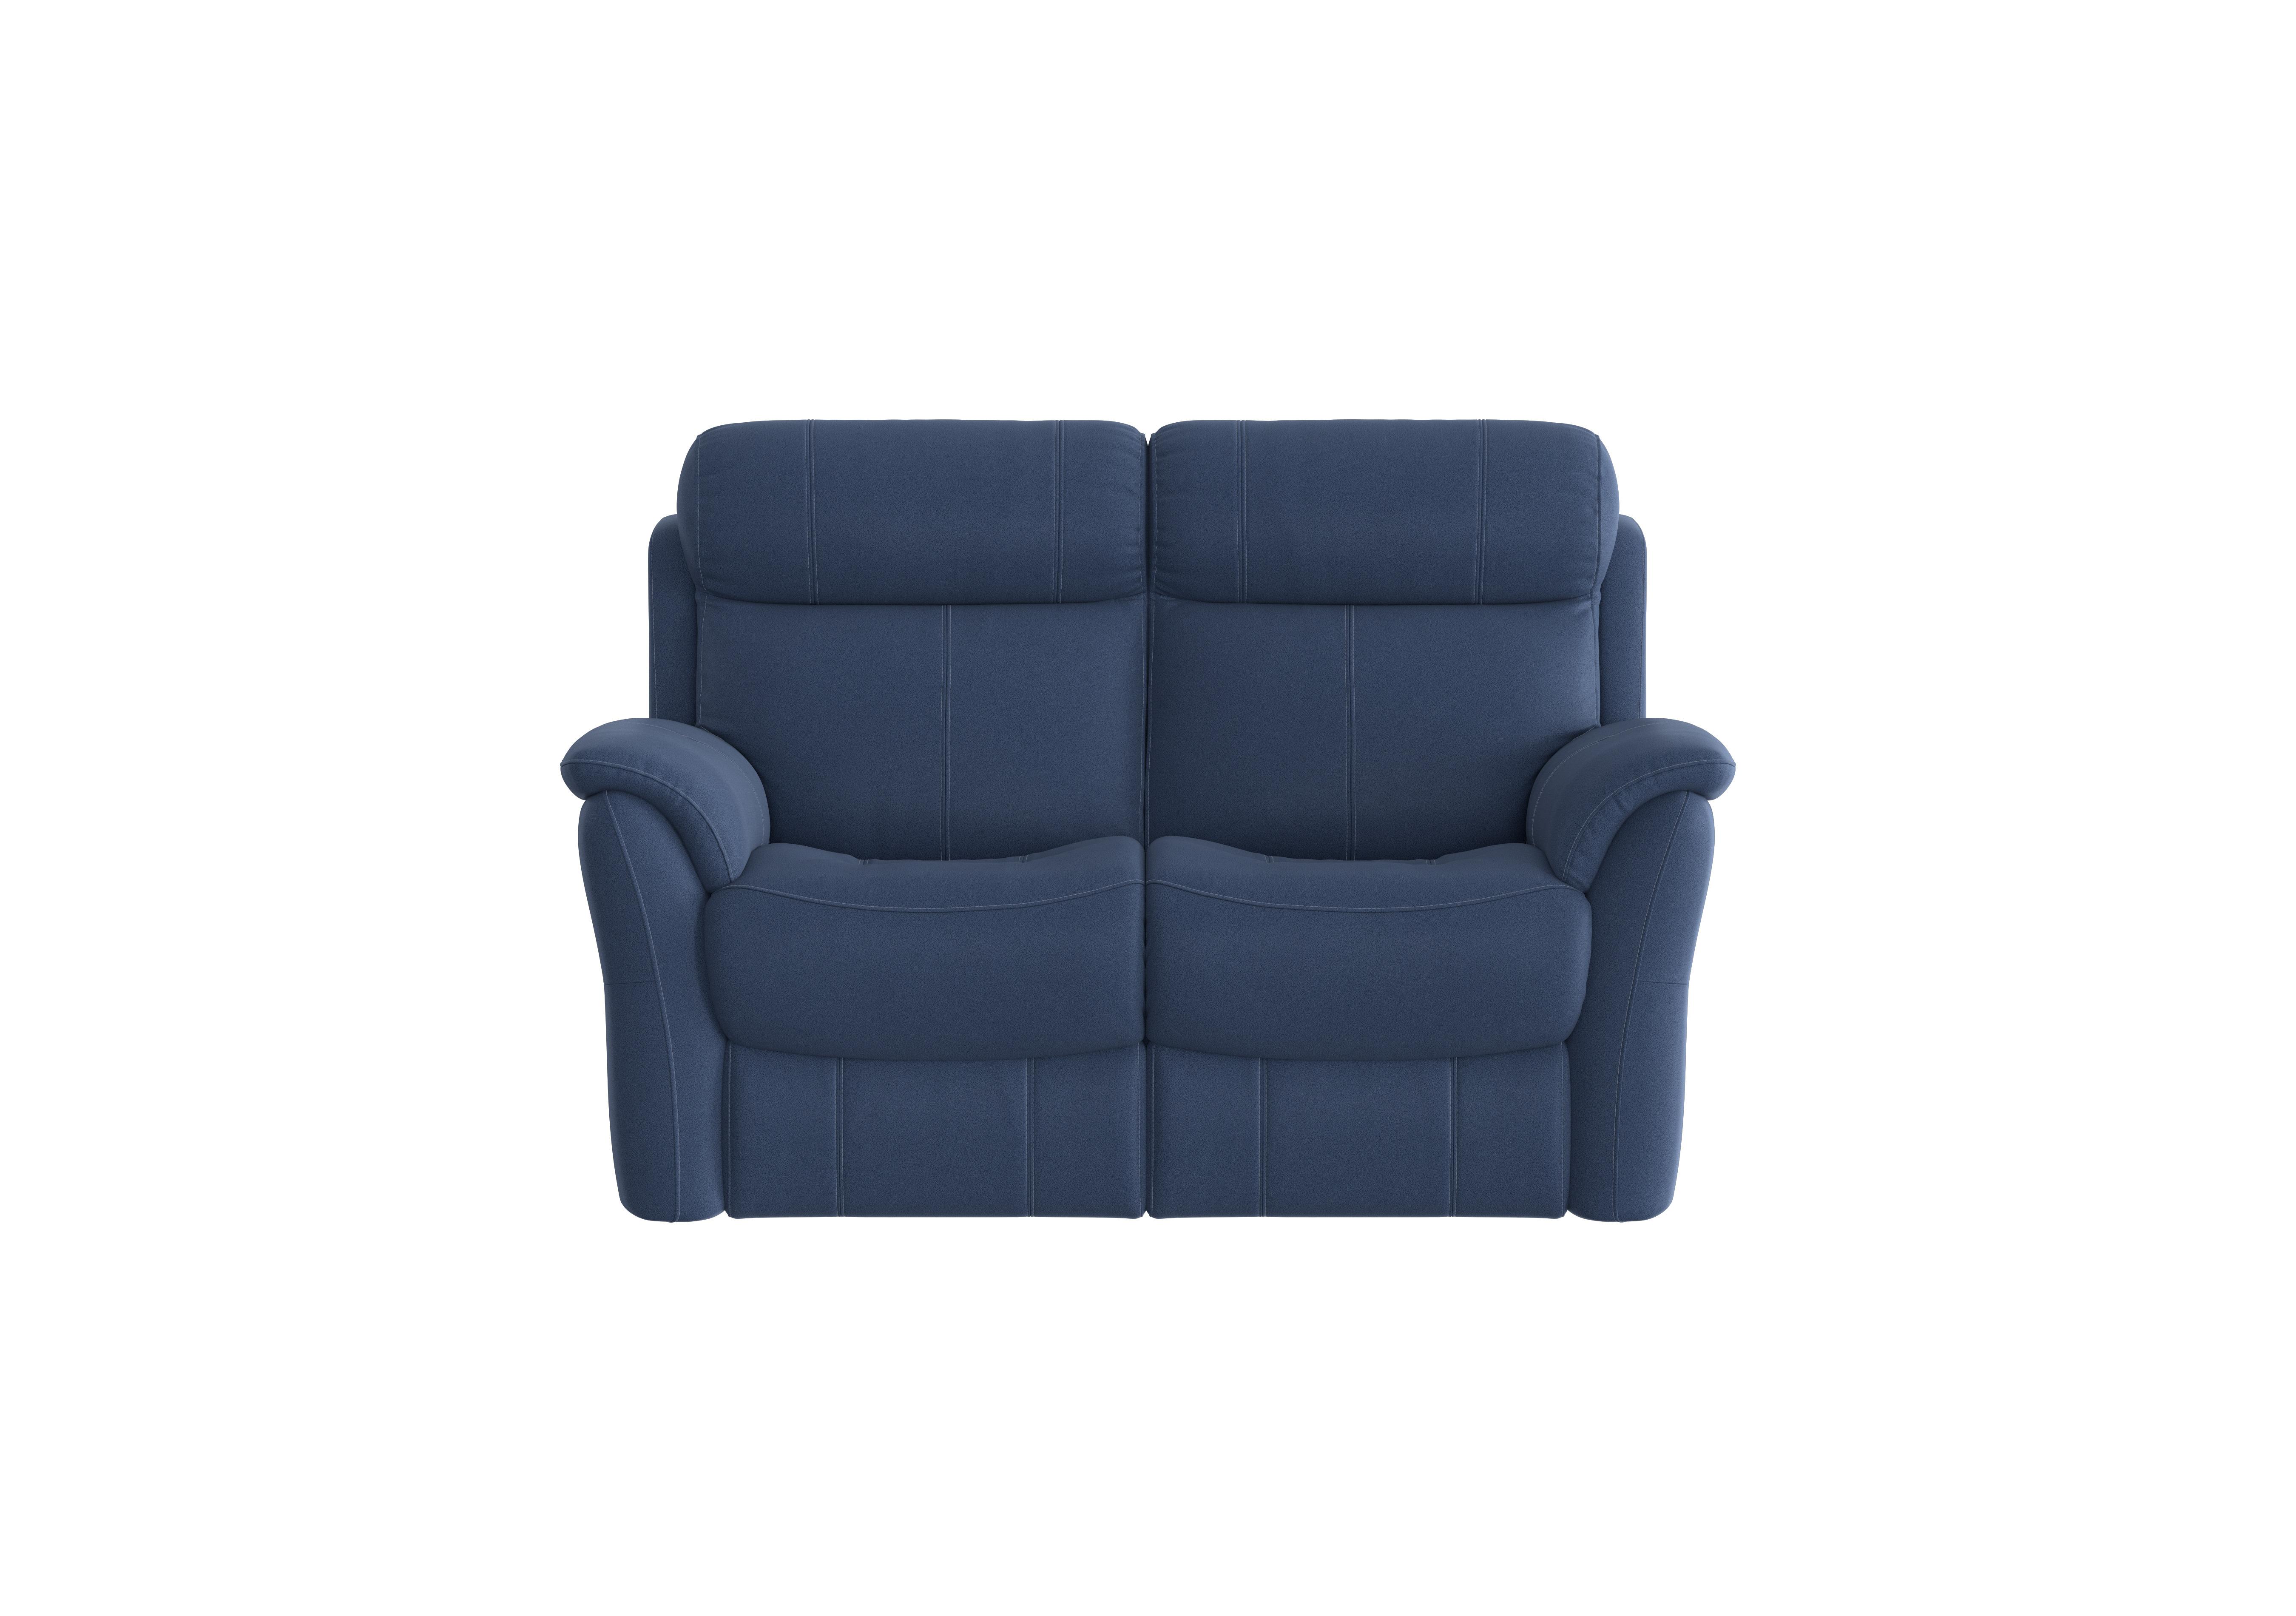 Relax Station Revive 2 Seater Fabric Sofa in Bfa-Blj-R10 Blue on Furniture Village